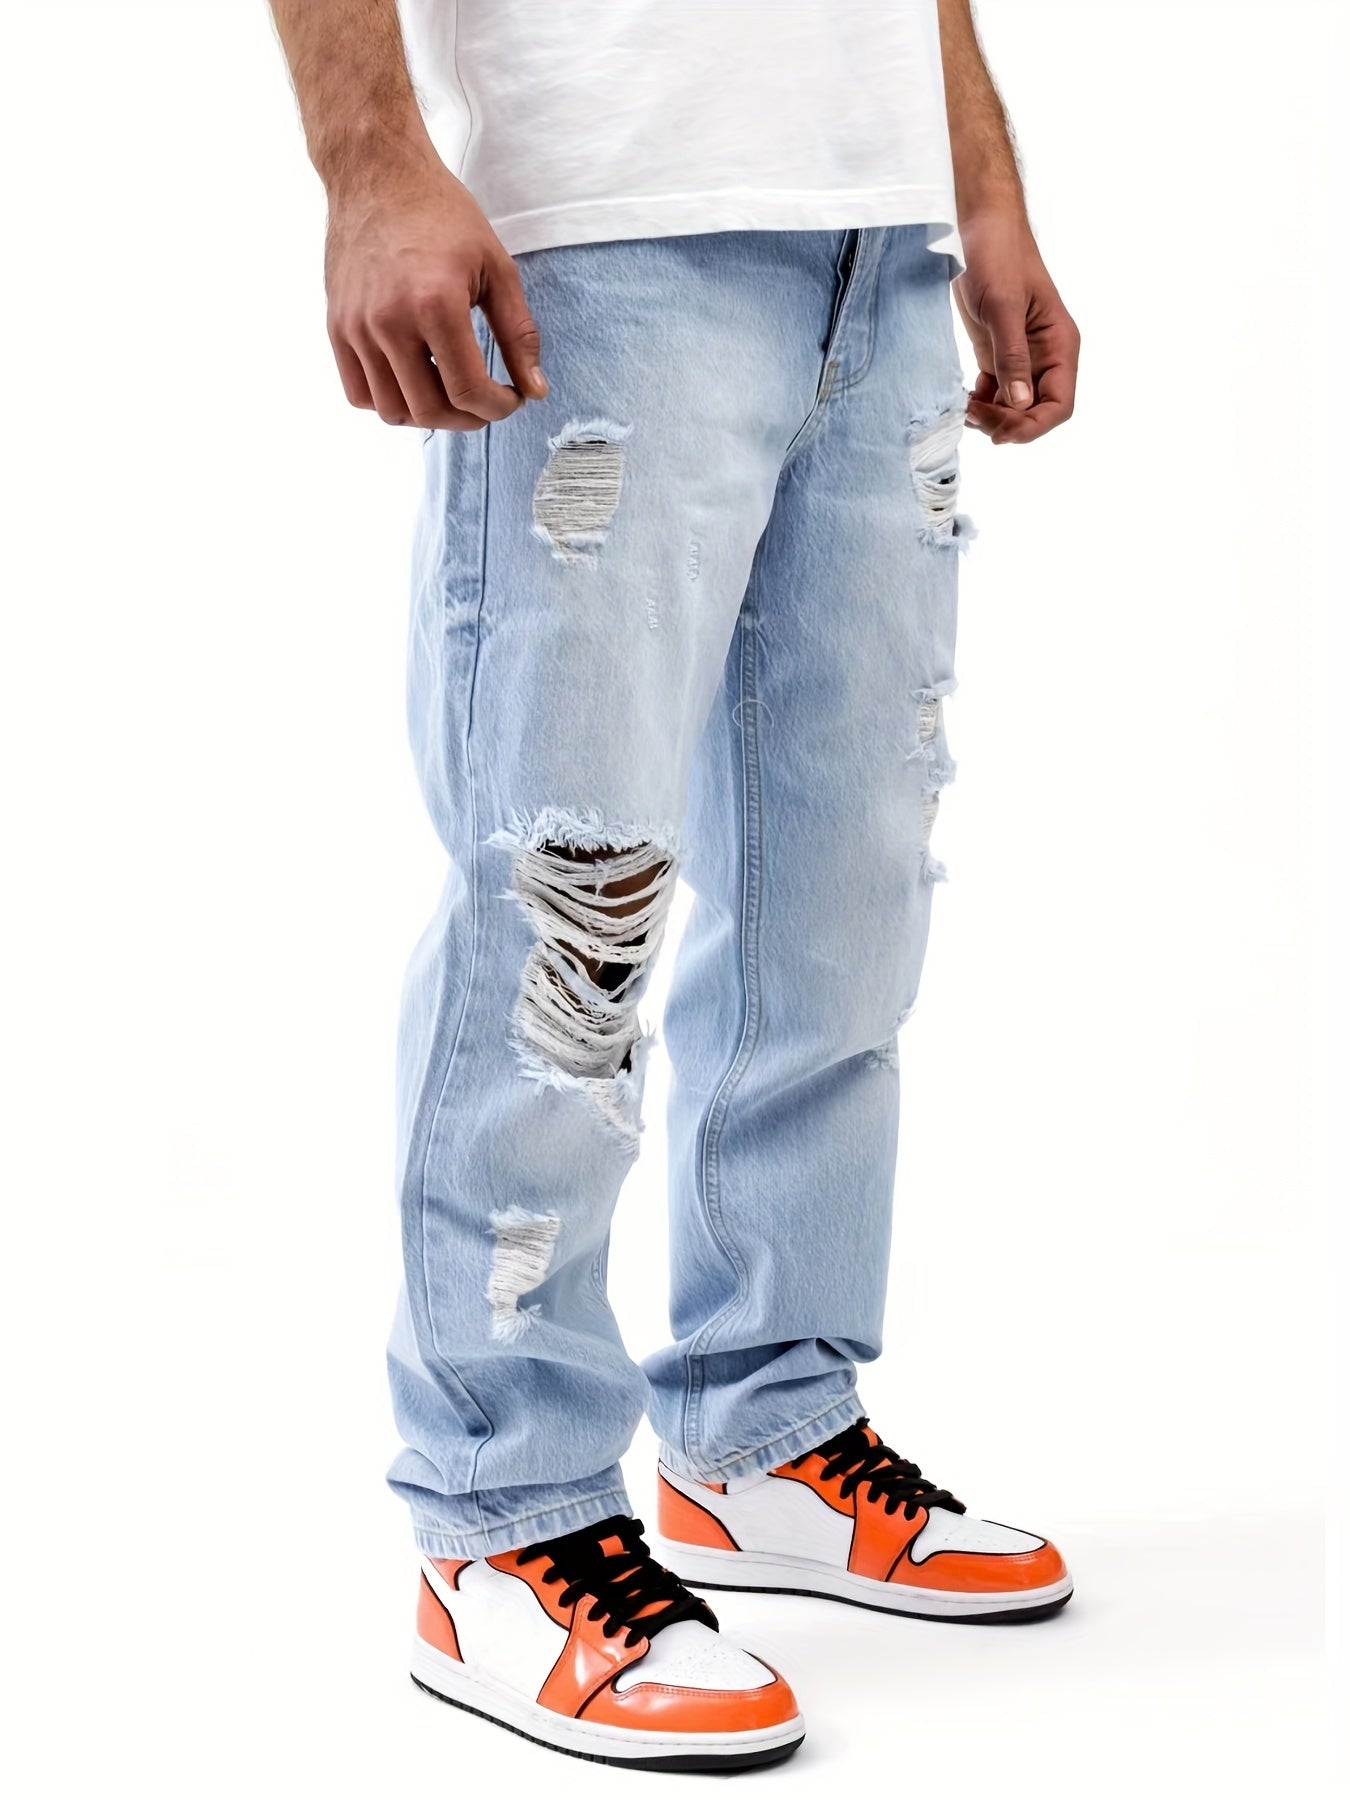 Wide Leg Cotton Blend Ripped  Jeans, Men's Casual Street Style Loose Fit Light Blue Denim Pants For Spring Summer